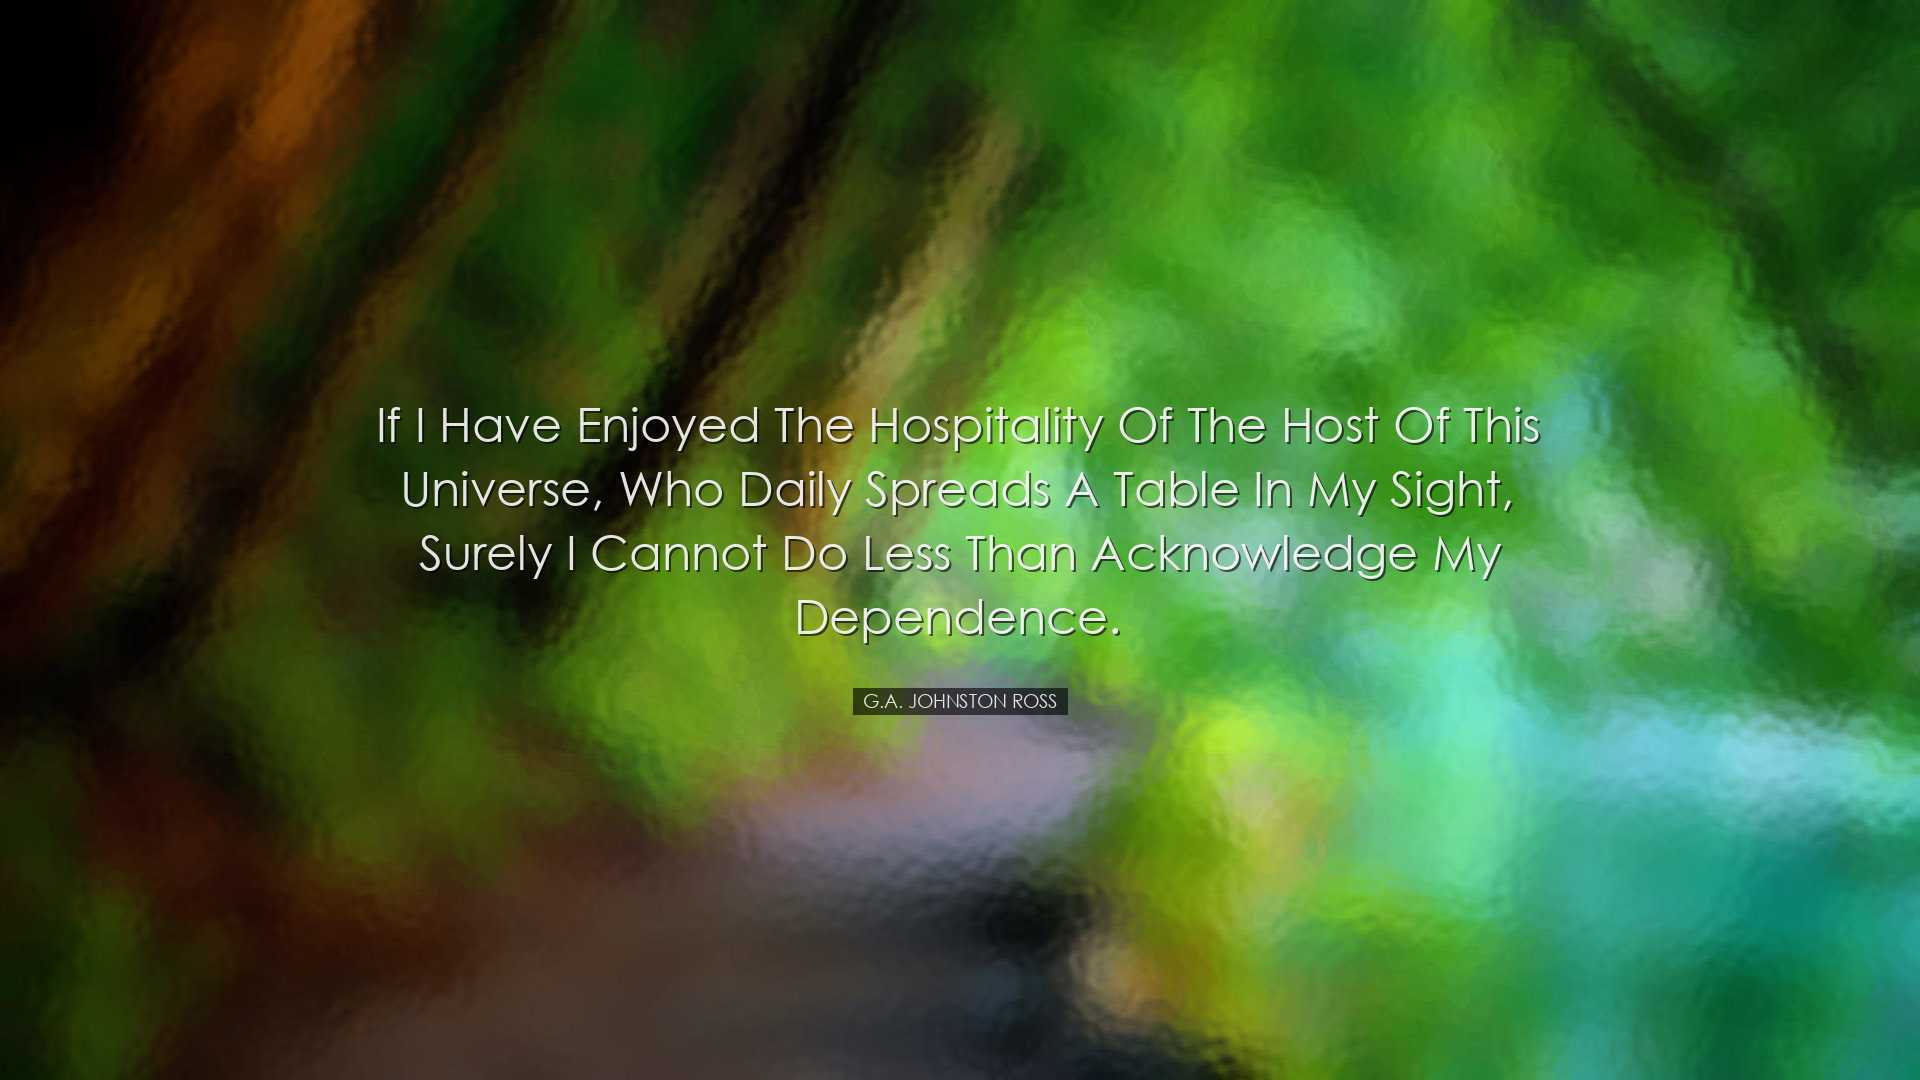 If I have enjoyed the hospitality of the Host of this universe, Wh